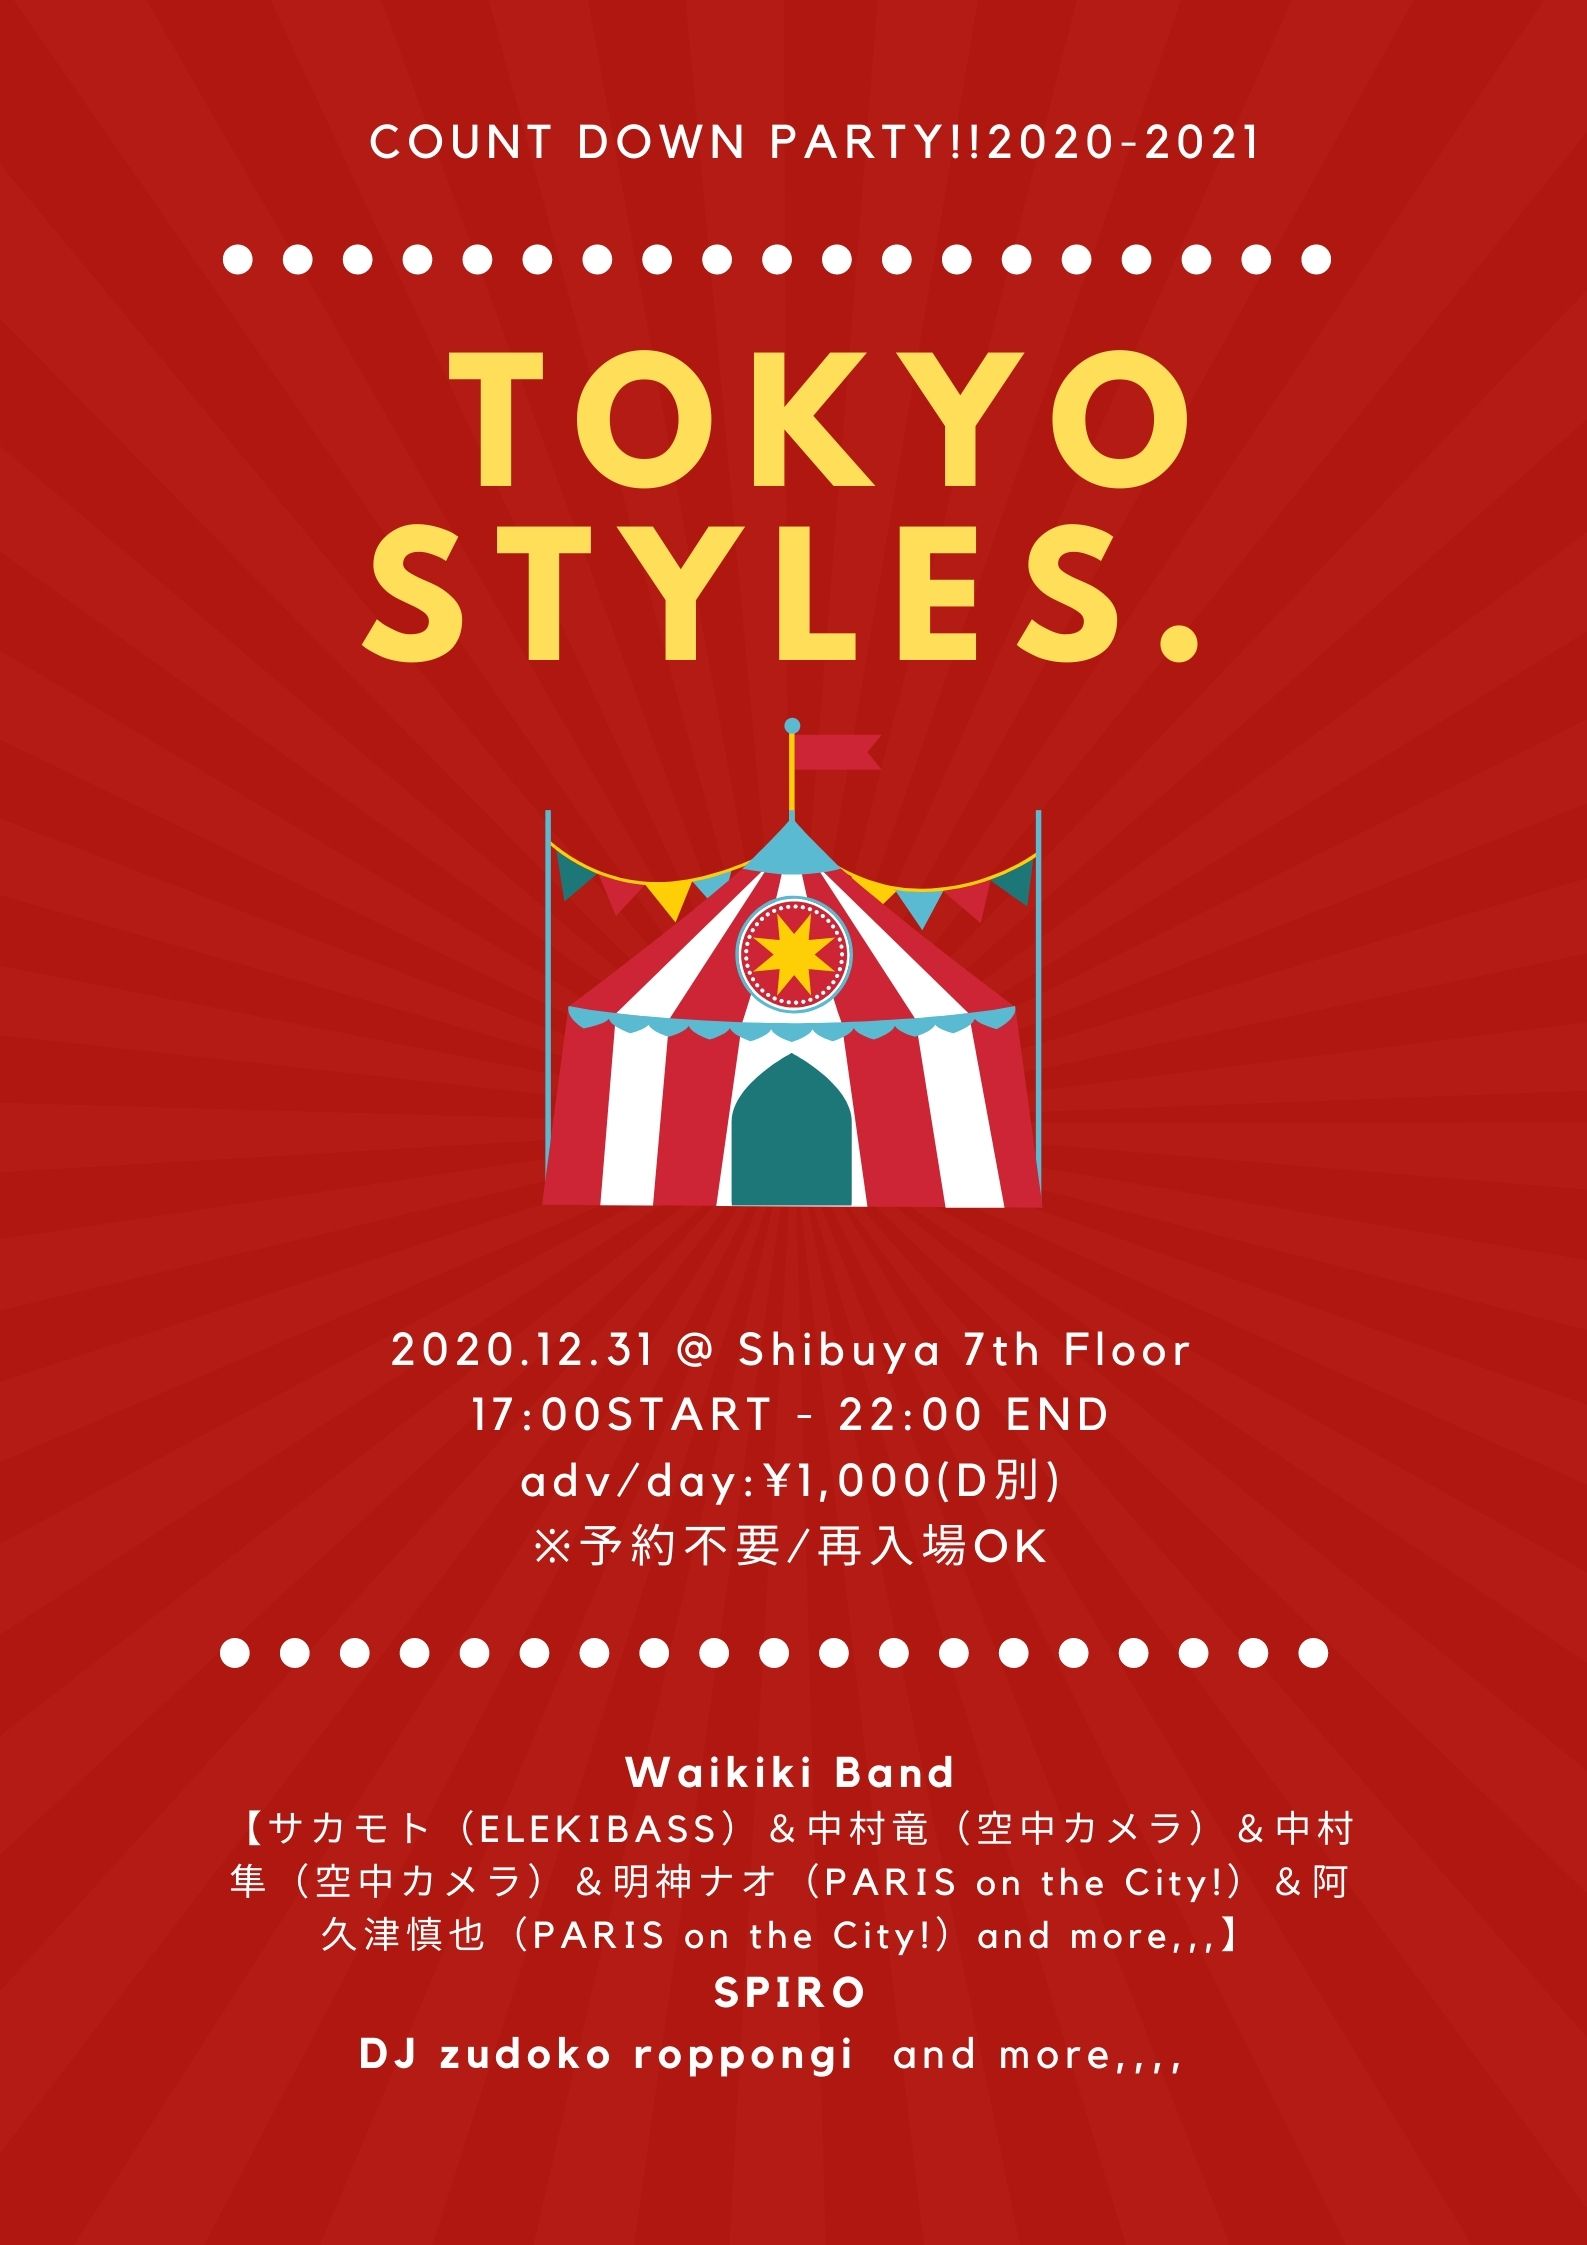 “Tokyo Styles.〜count down party!!2020-2021”